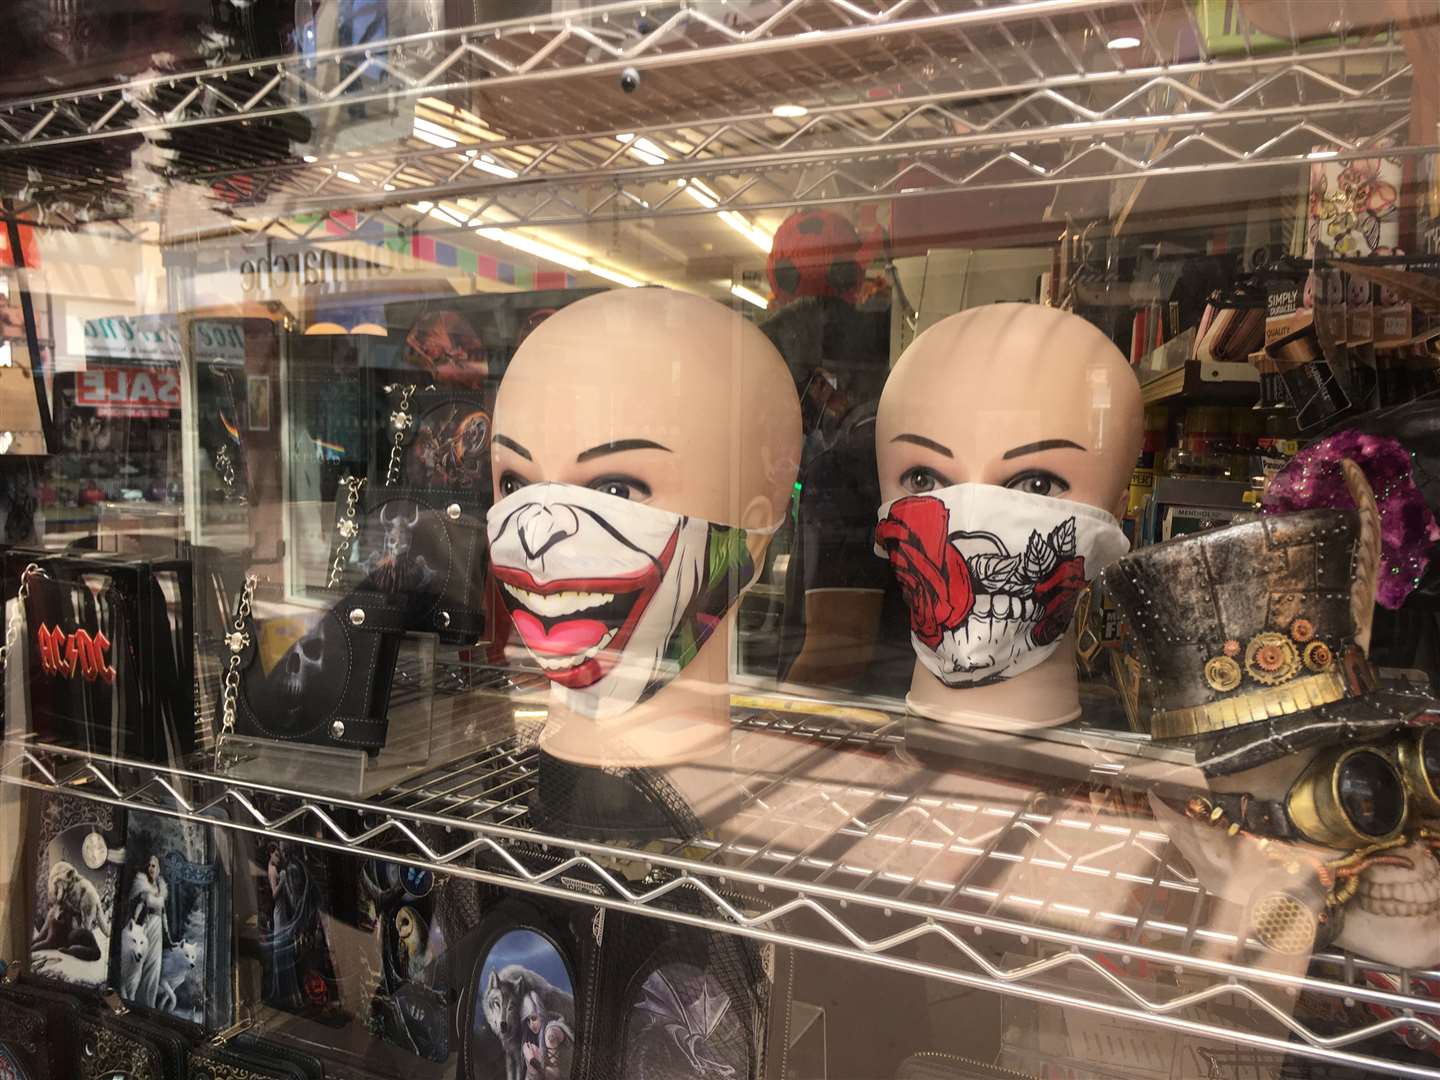 Smile with these novelty face masks in the Forum shopping centre, Sittingbourne